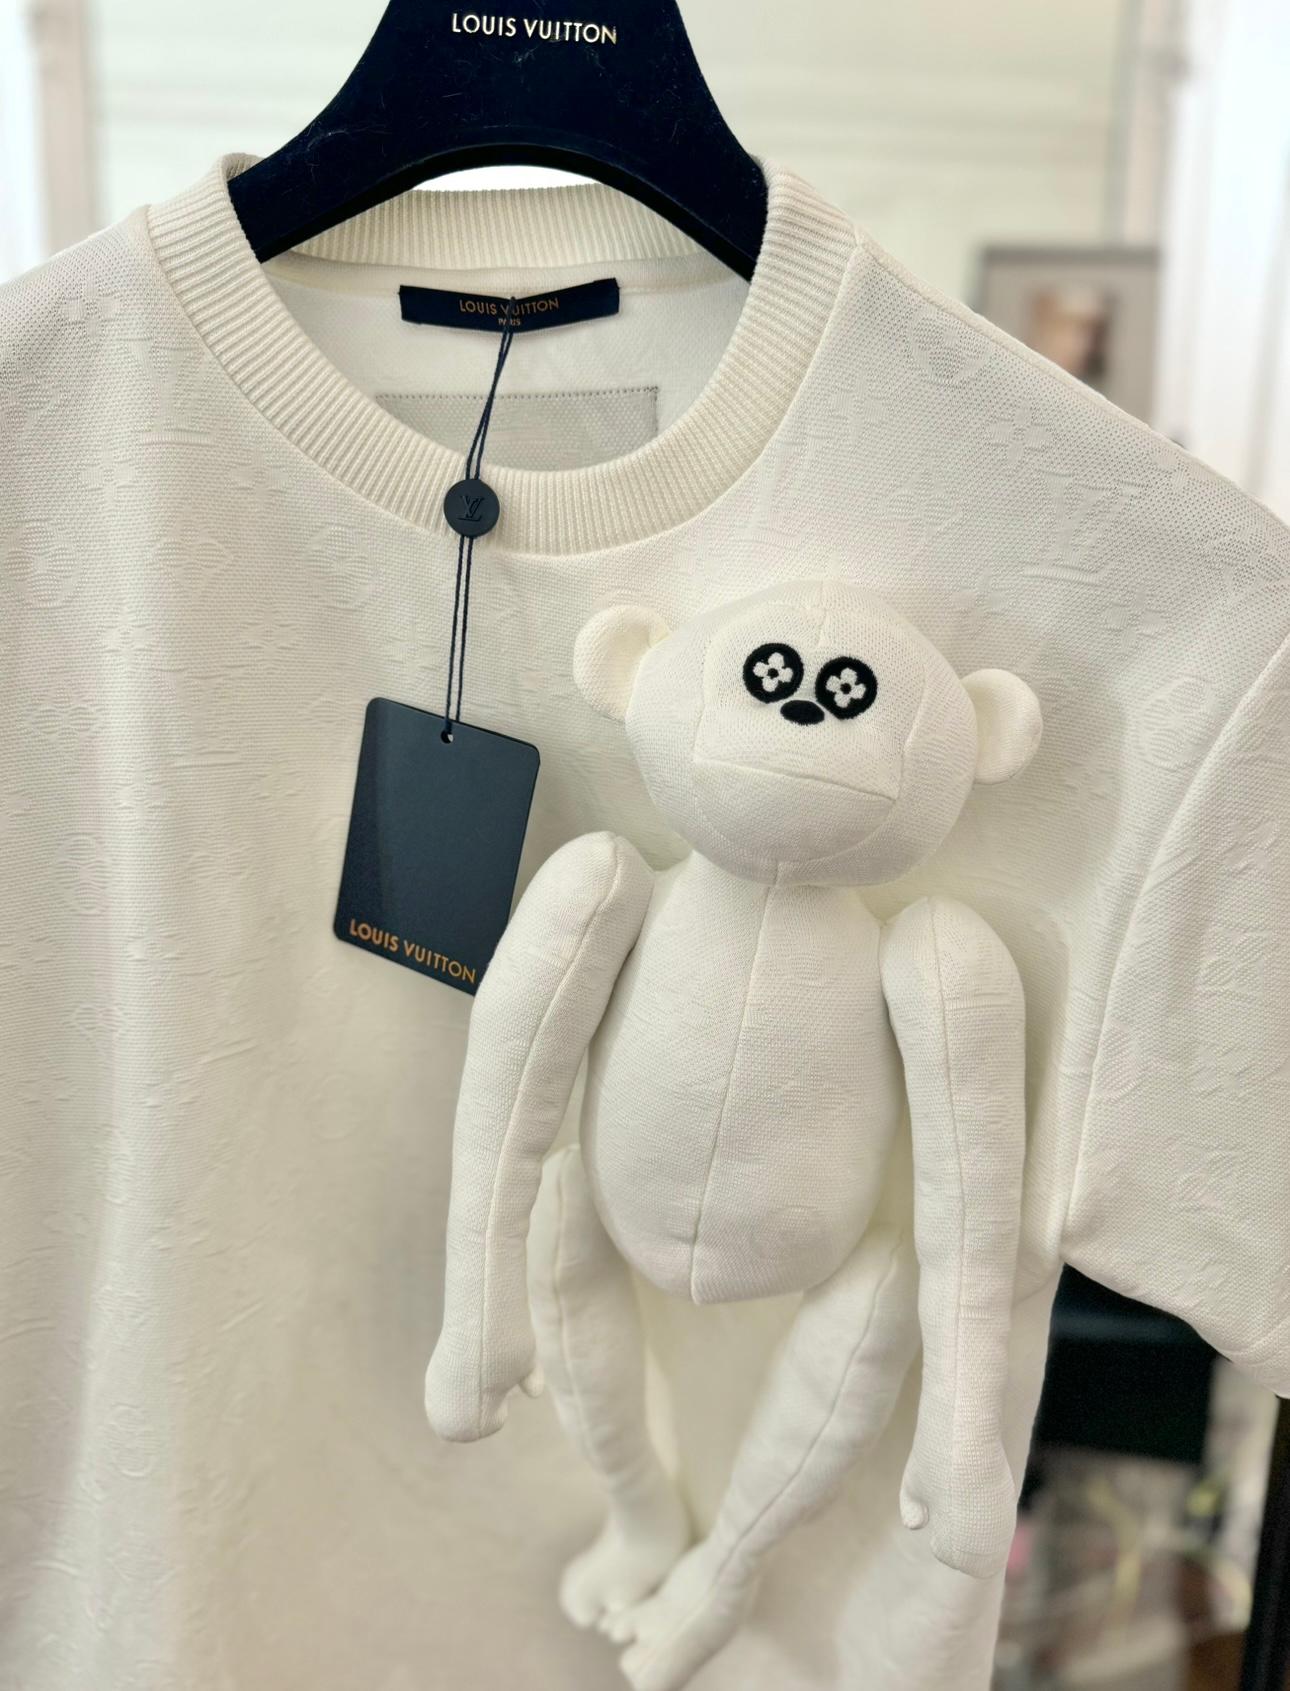 Louis Vuitton X Virgil Abloh limited edition 3D monkey monogram T Shirt brand new with tag, rare, size XS on the tag, unisex 